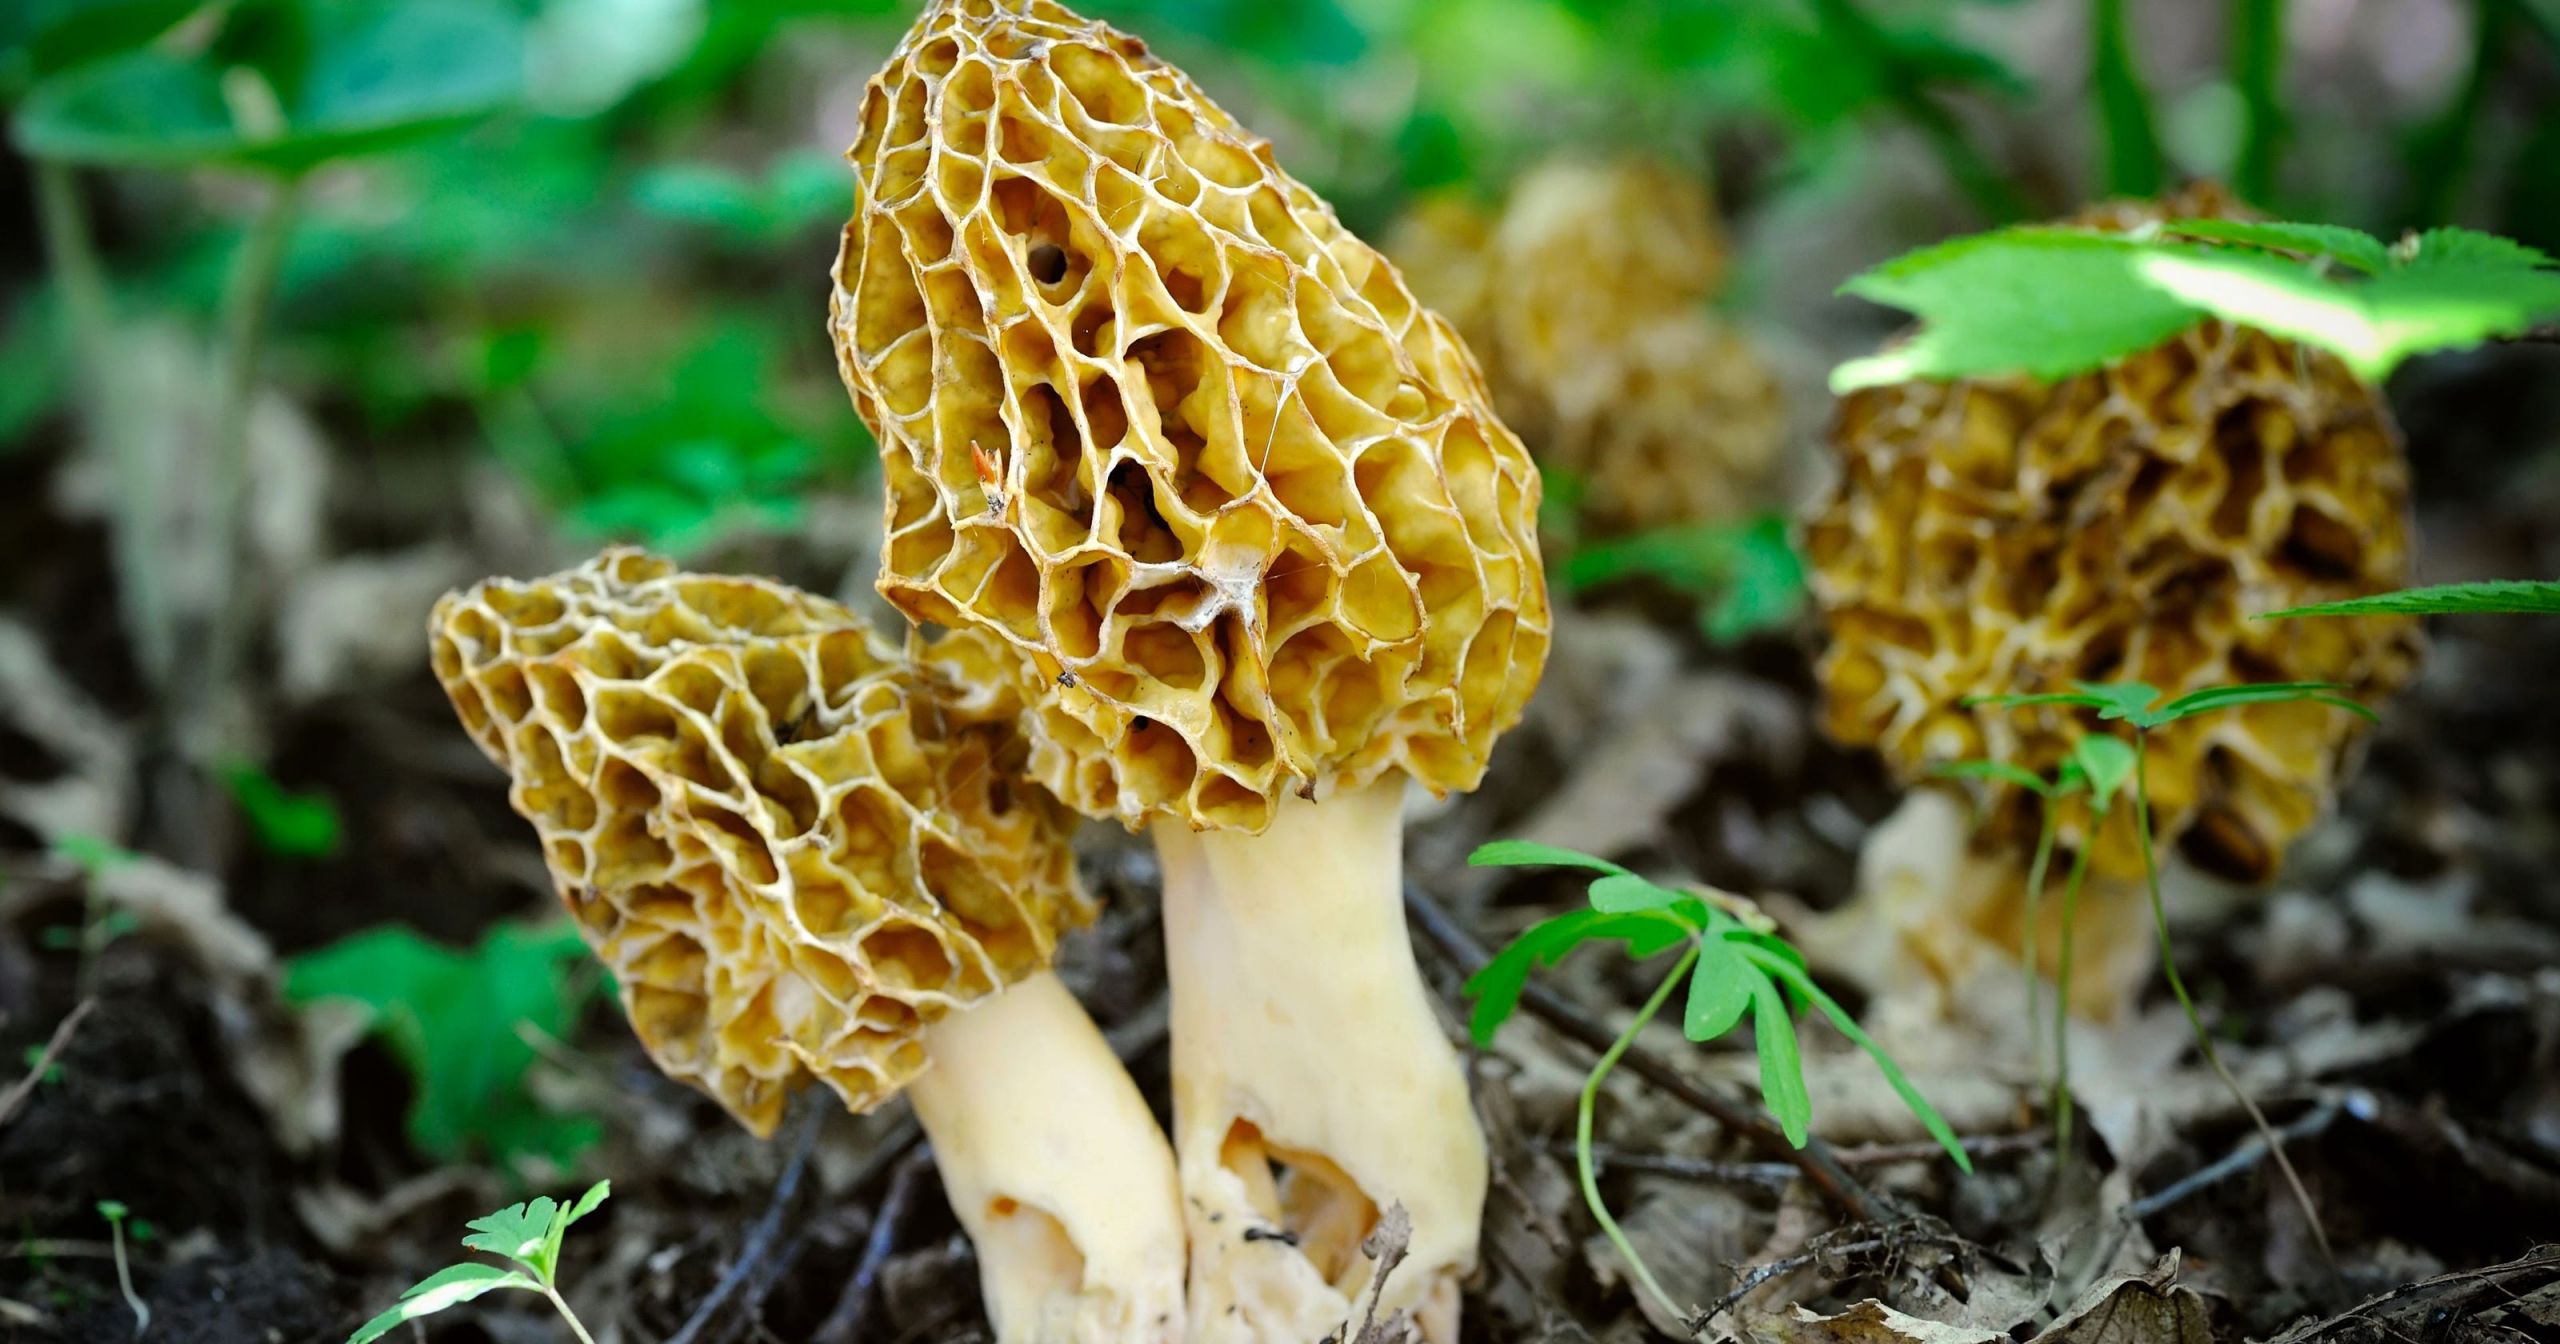 Pictures Of Morel Mushrooms
 Tips for wrapping up morel mushroom season in Johnson County